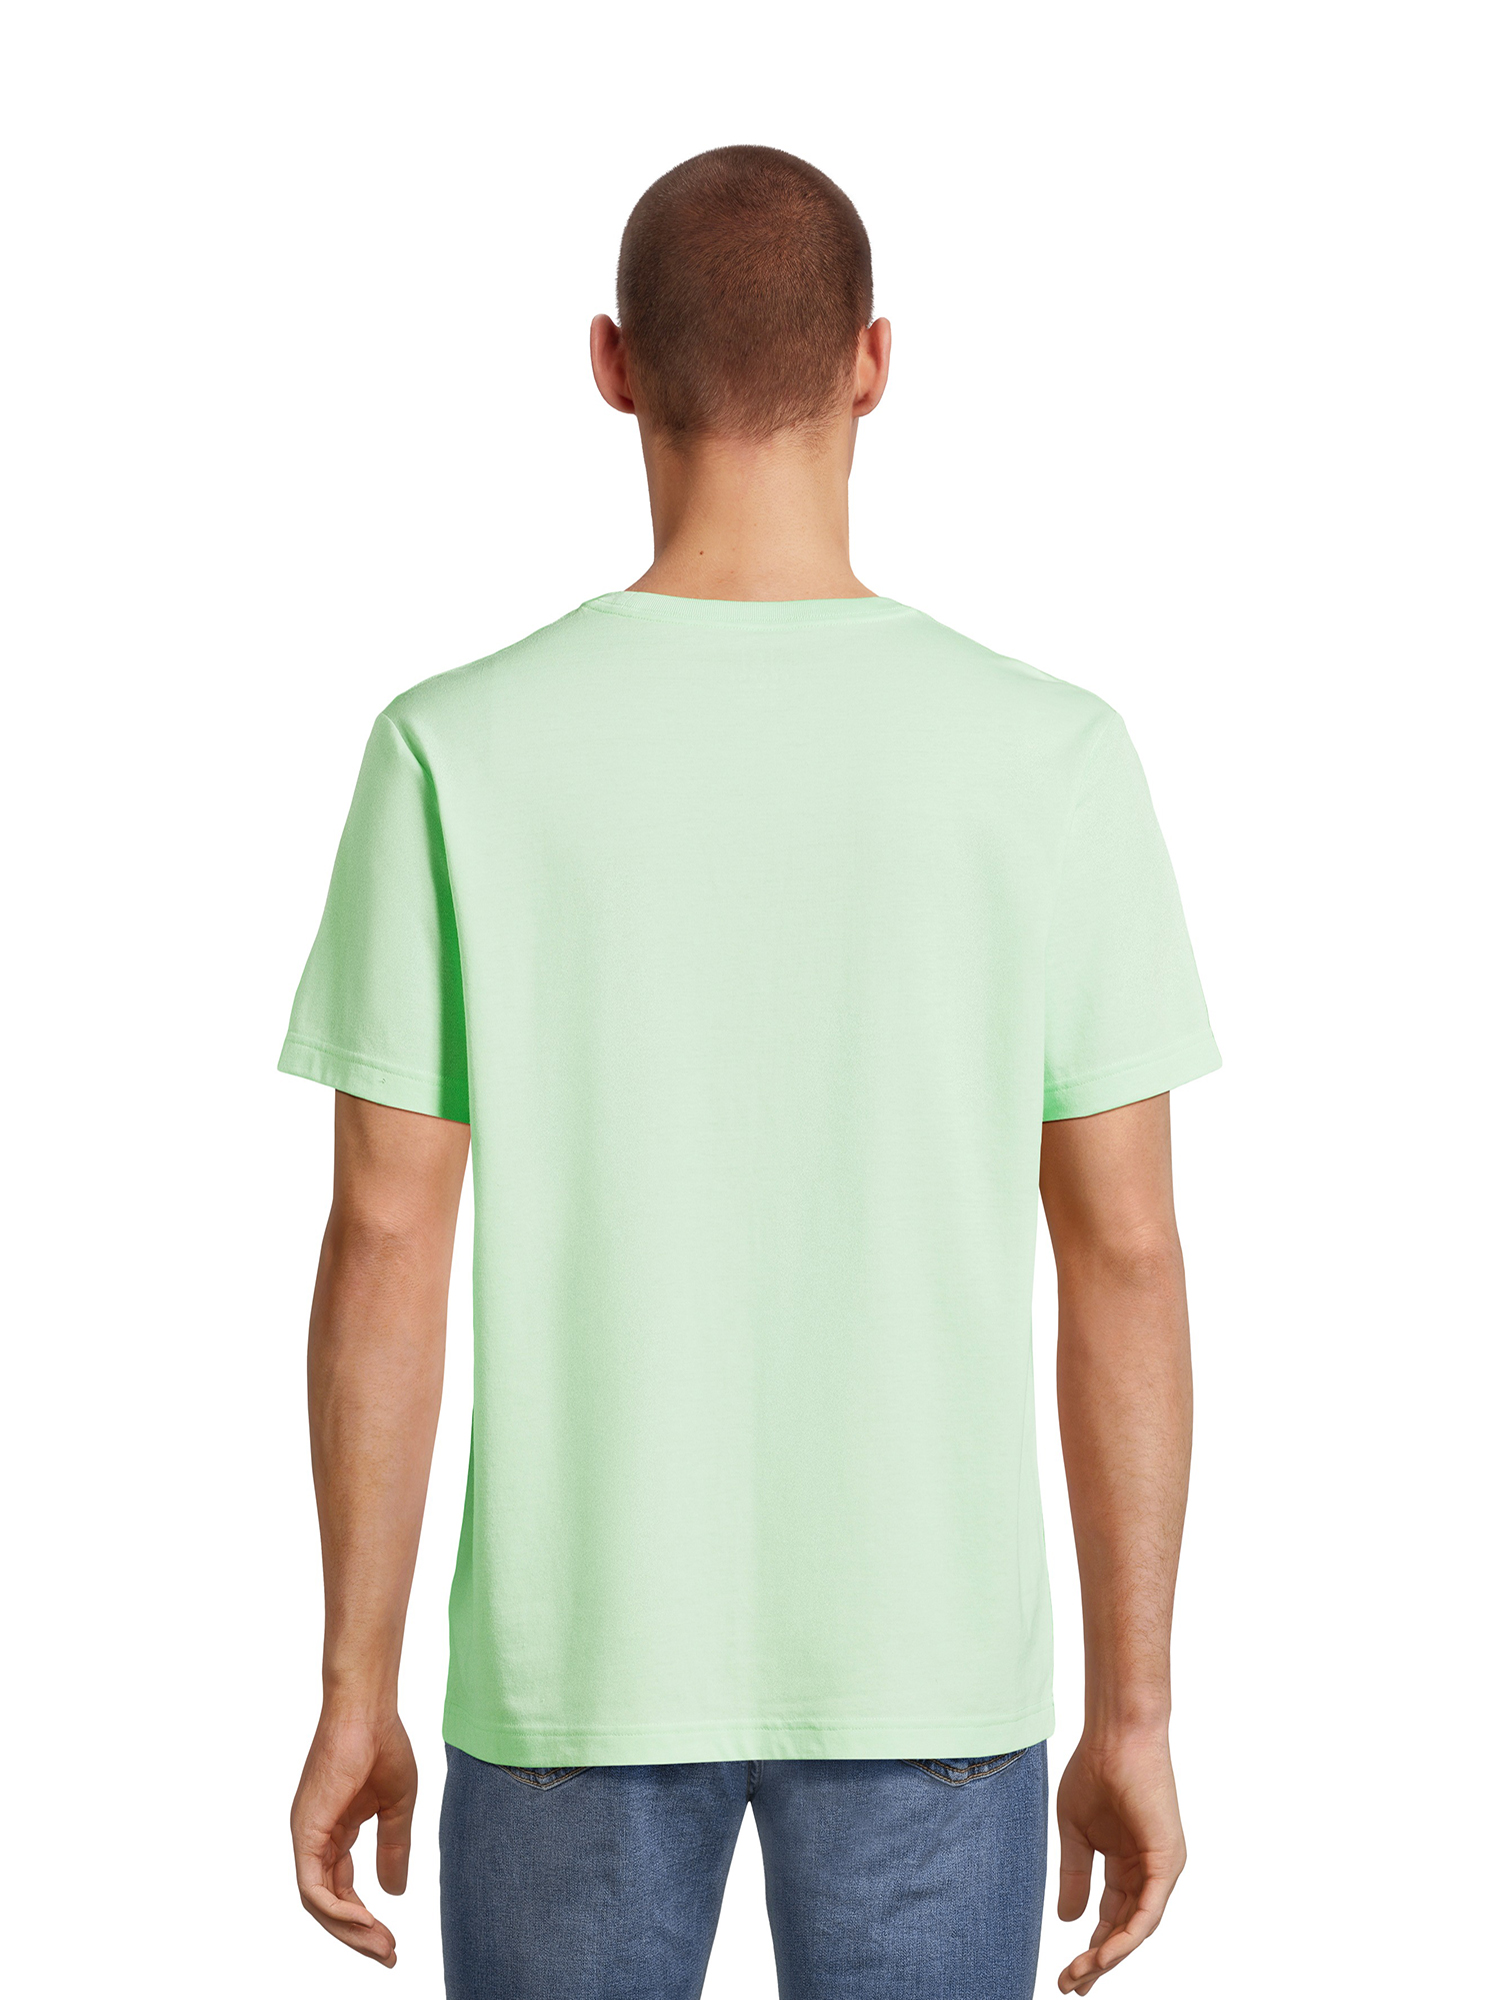 George Men's & Big Men's Crewneck Tee with Short Sleeves, Sizes XS-3XL - image 3 of 6